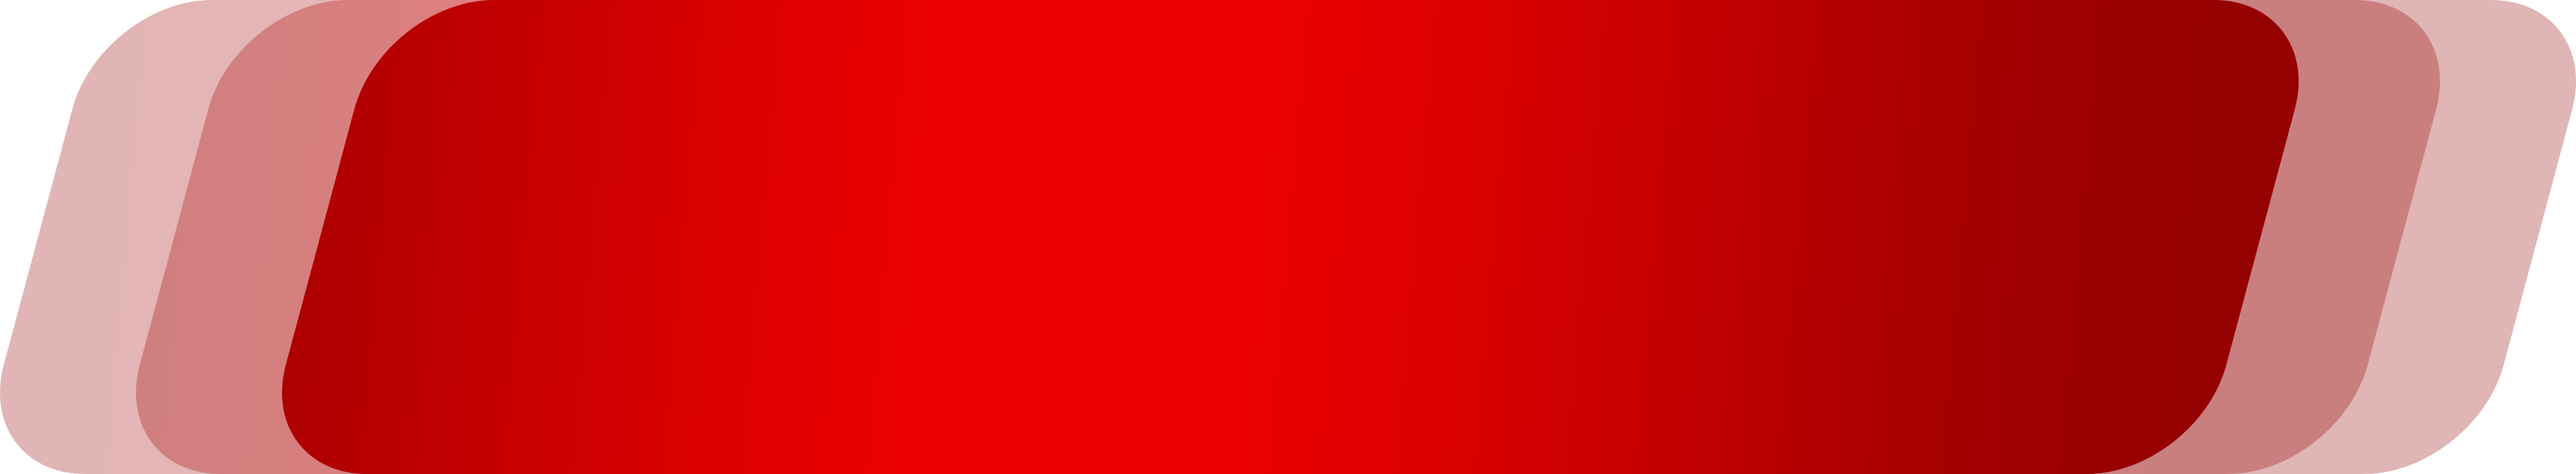 red banner and bar